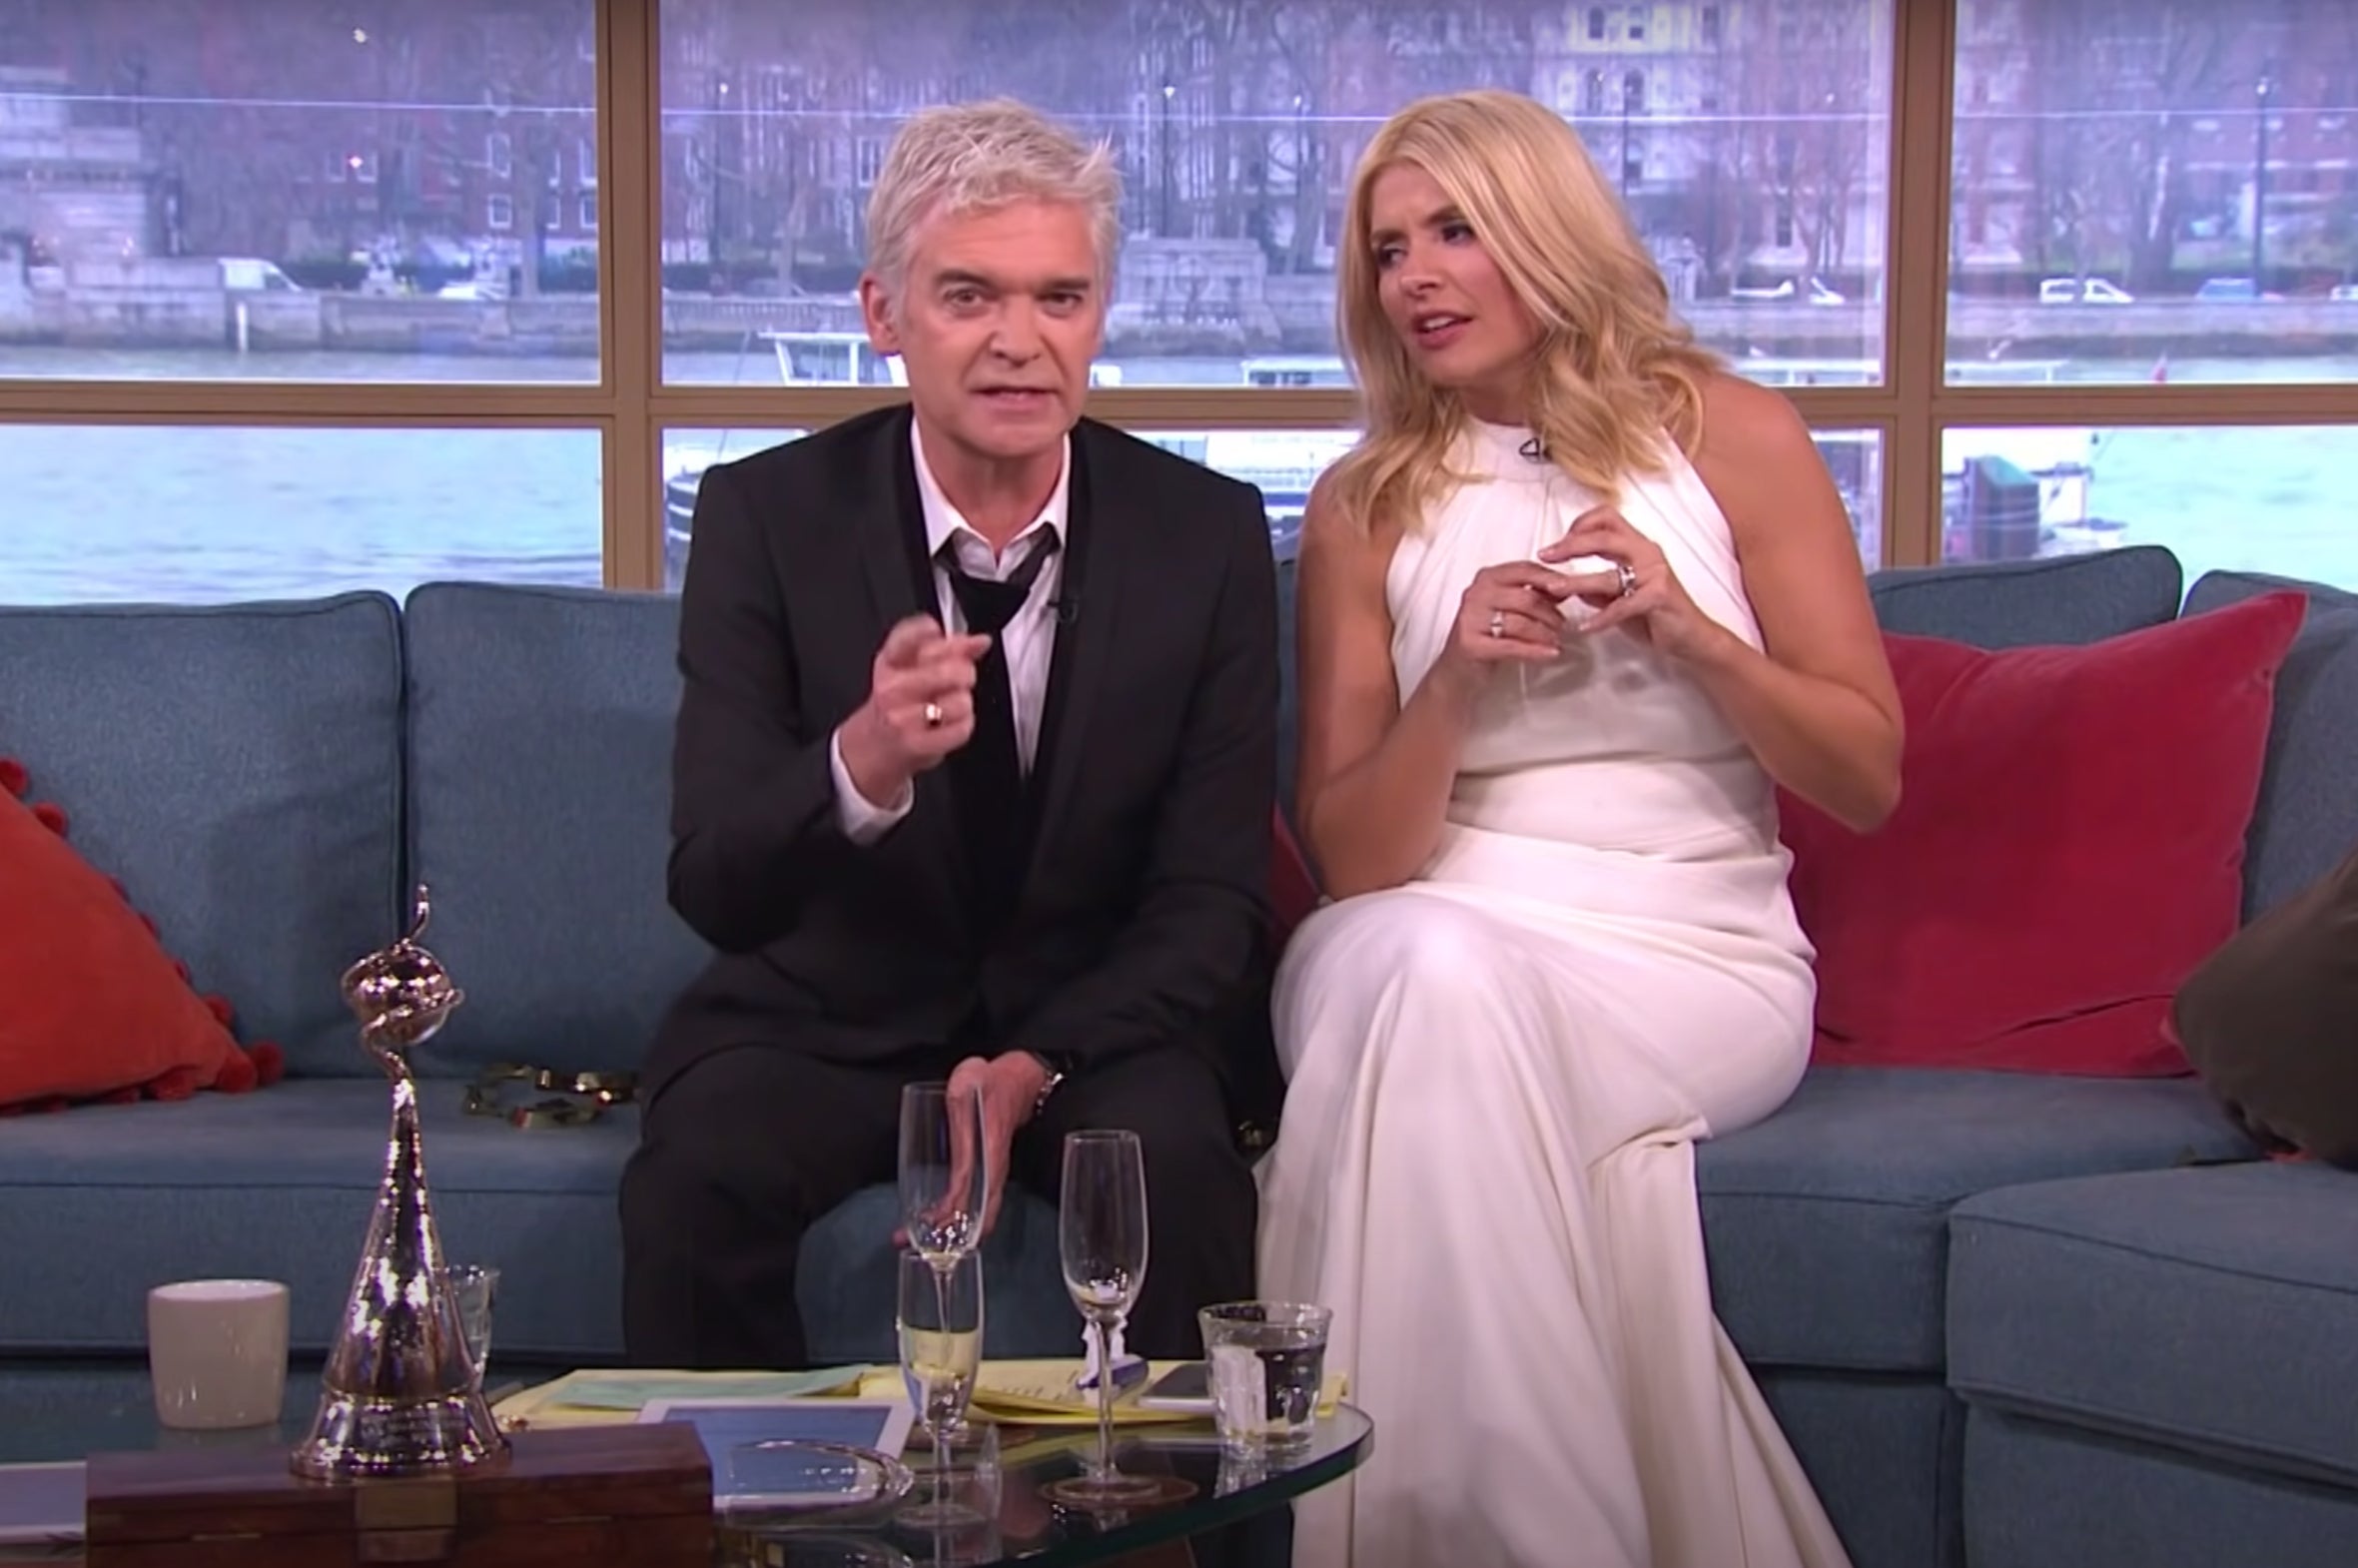 Presenting hungover with former co-host Phillip Schofield after the 2016 NTAs